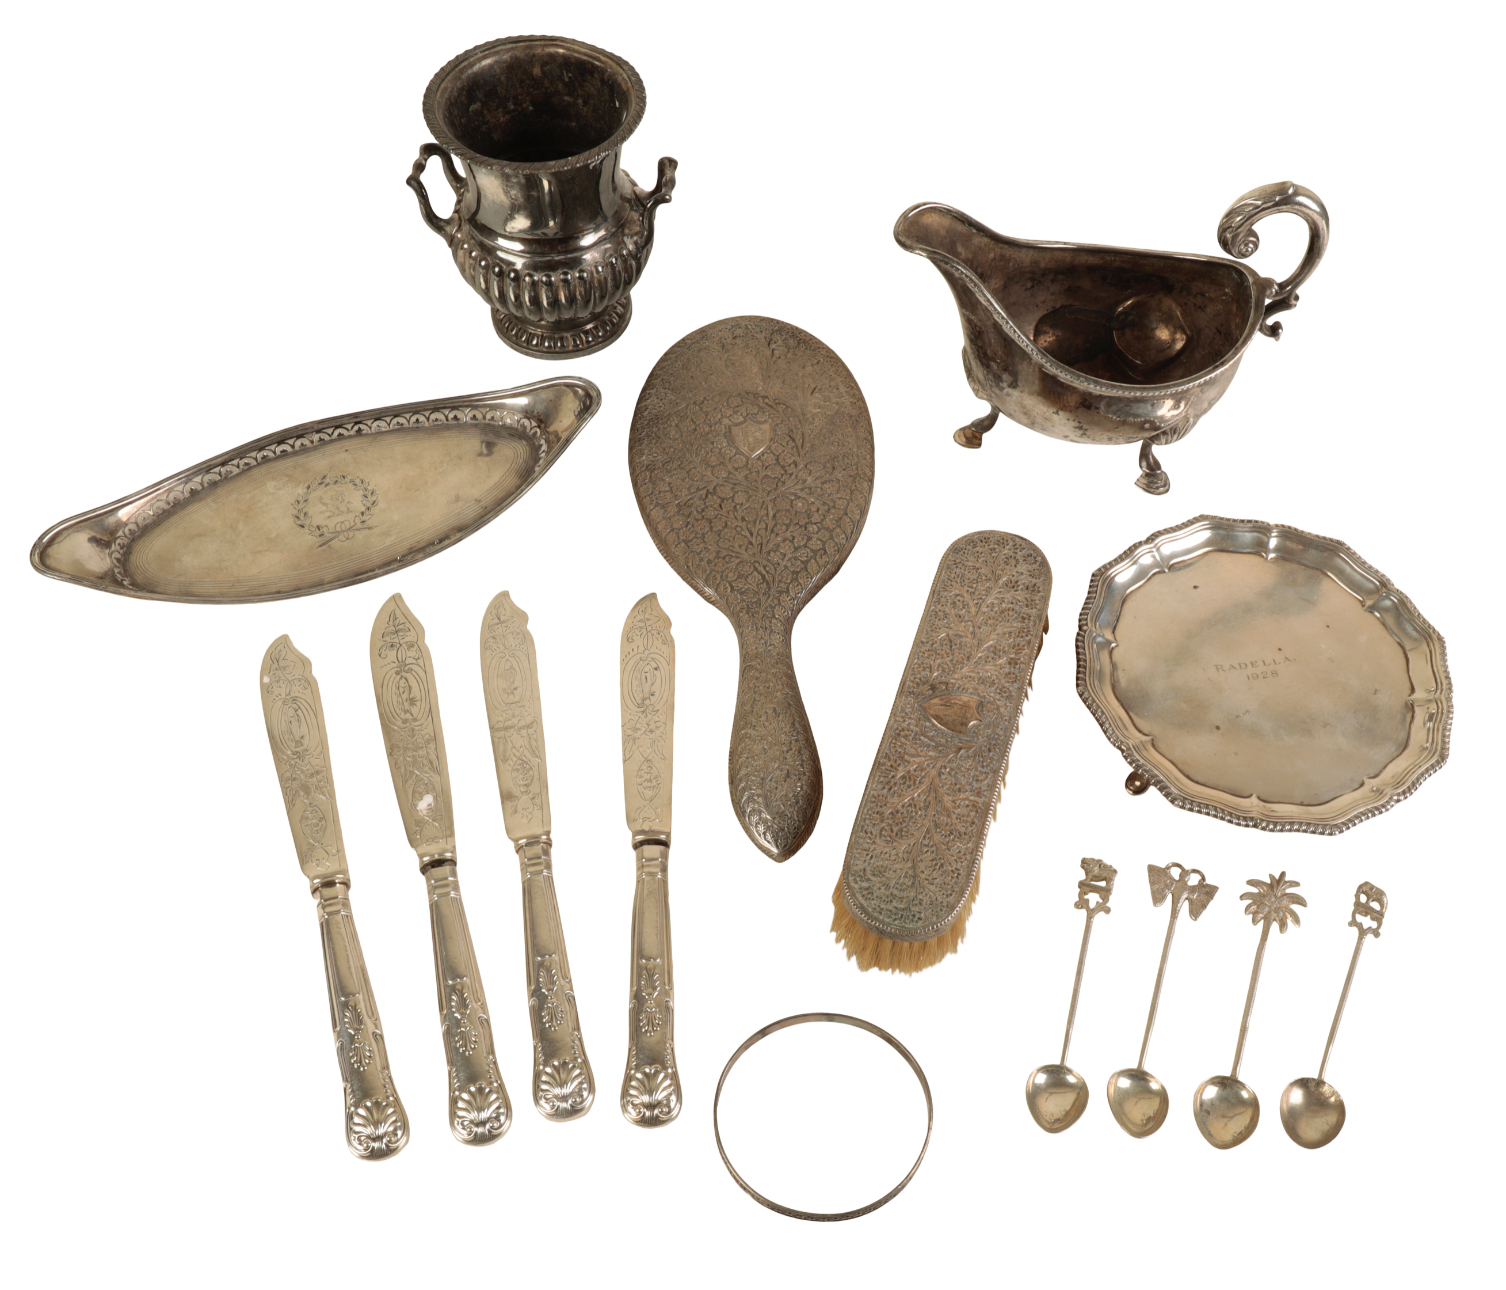 A GEORGE V SILVER WAITER OF 18TH CENTURY DESIGN